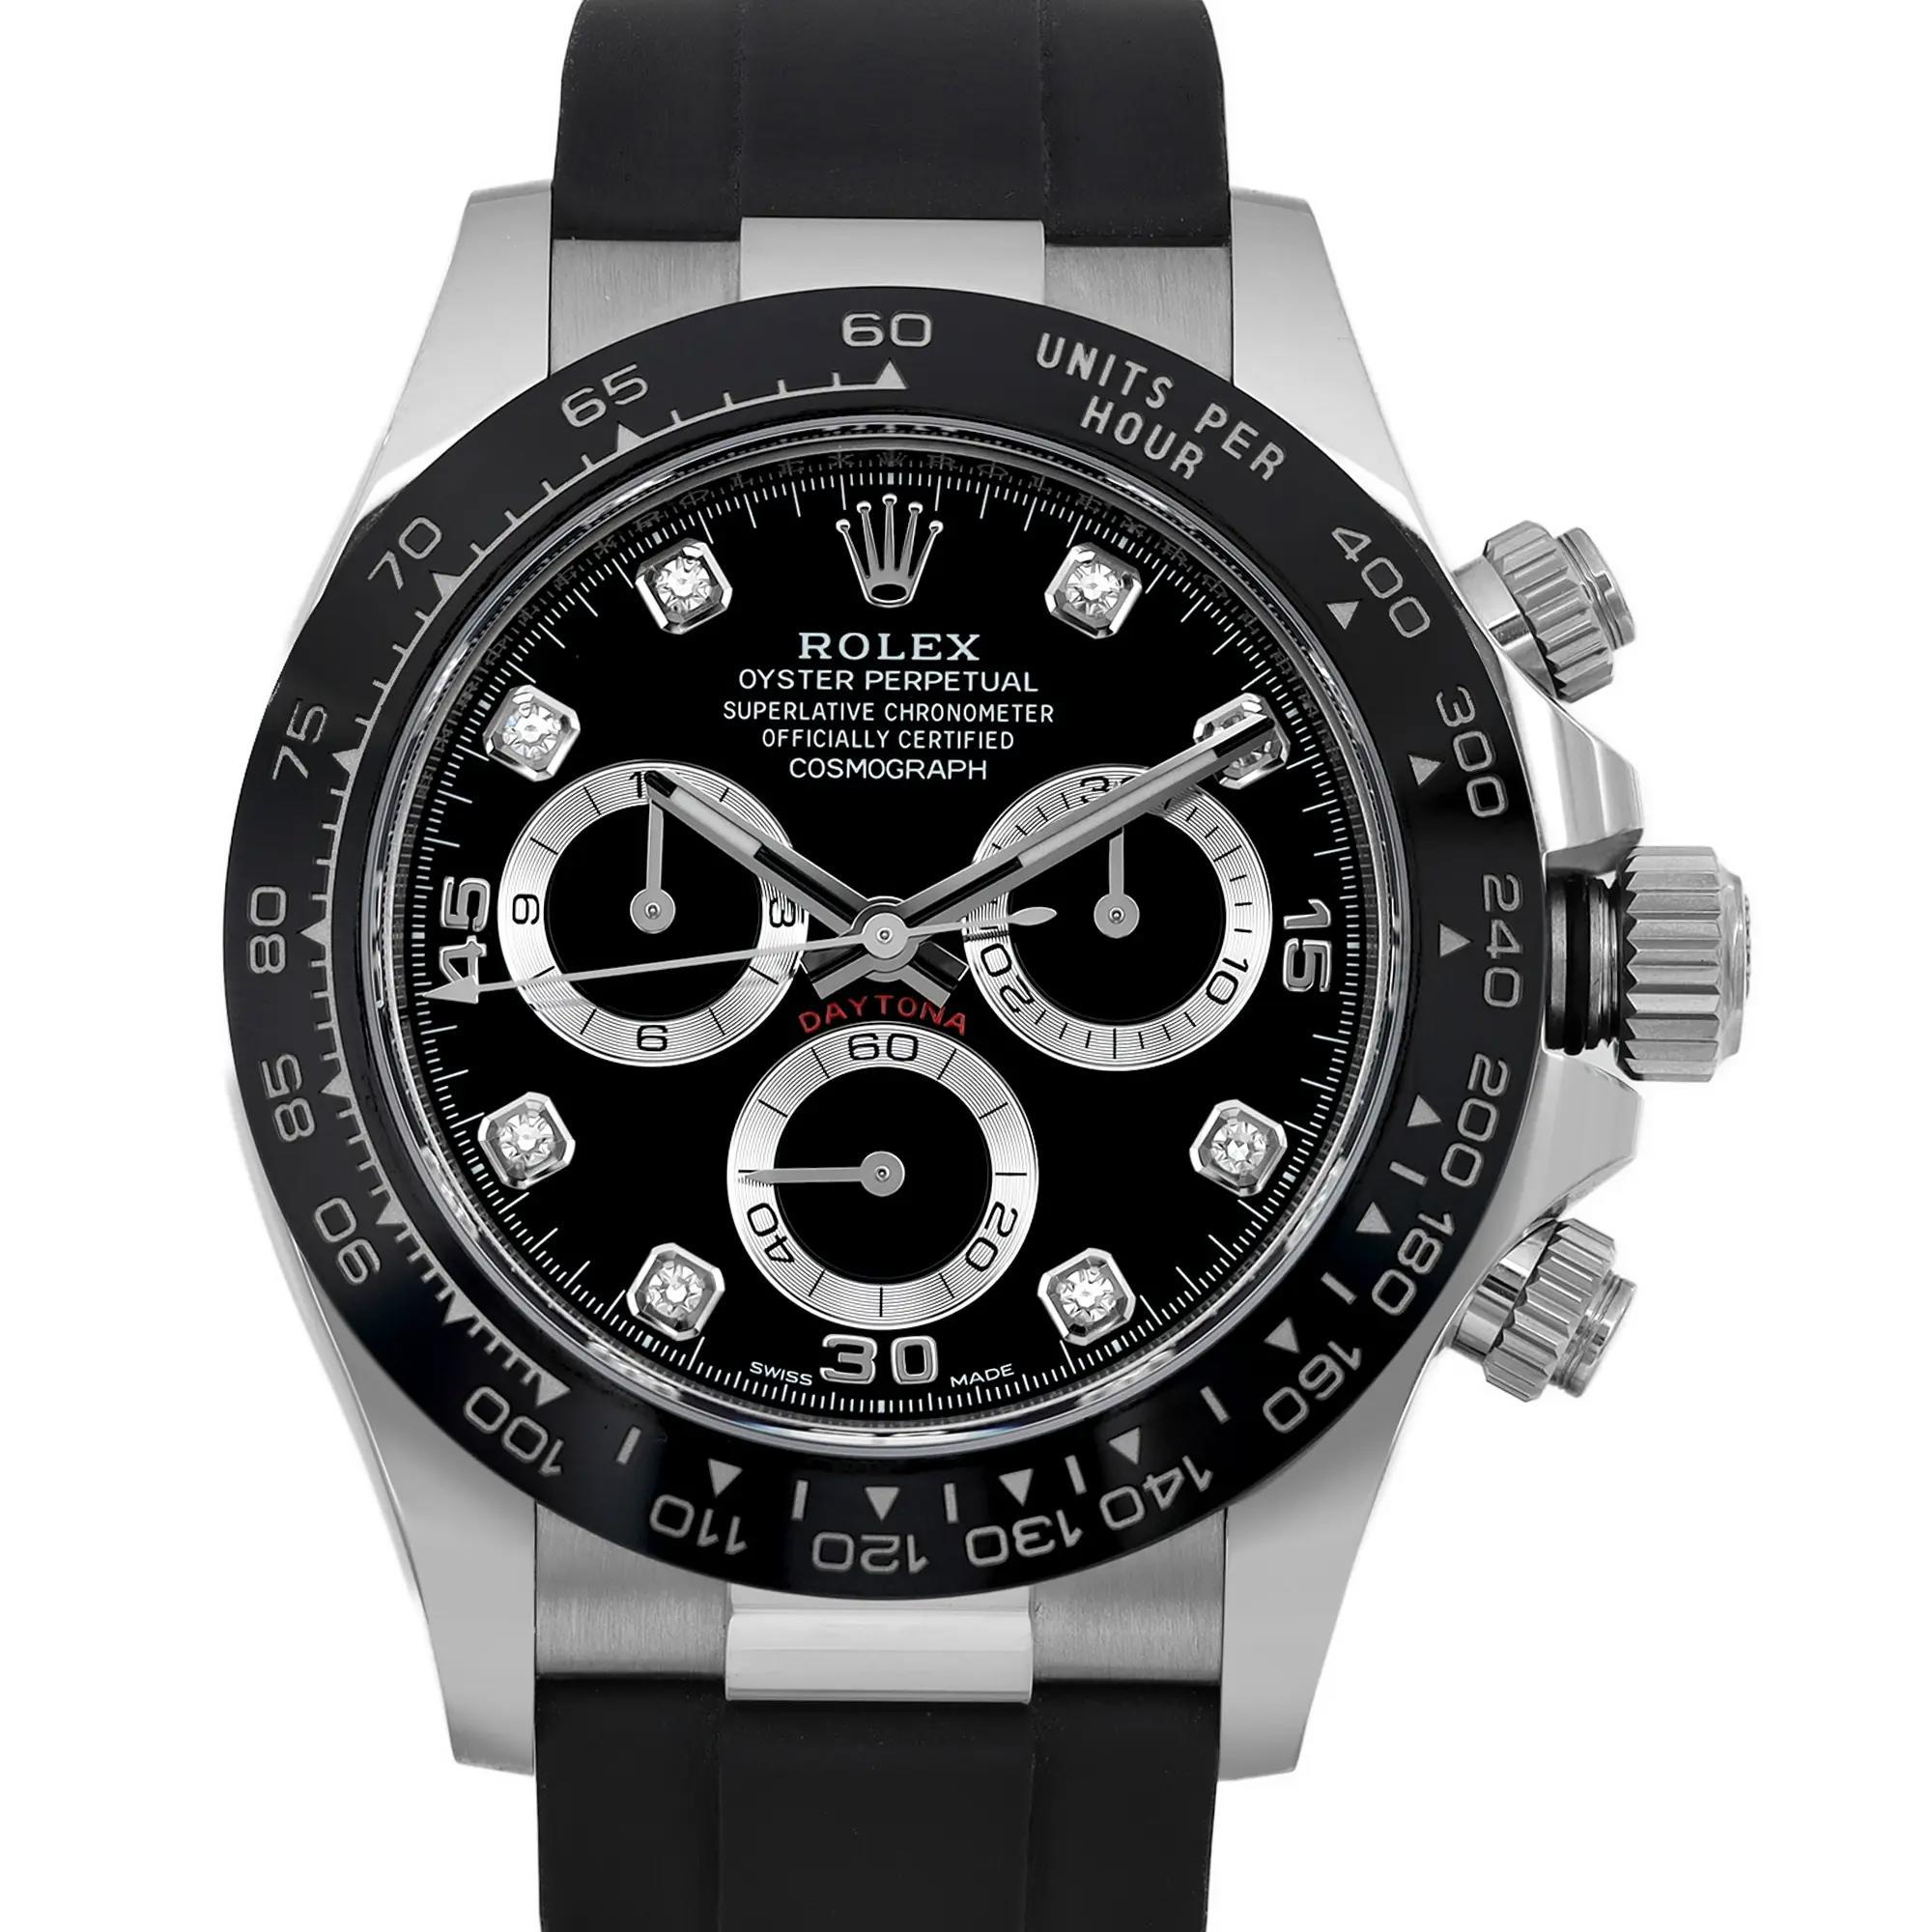 Unworn. 2022 card. Comes with the original box and papers.

Brand and Model
Brand: Rolex
Model: Cosmograph Daytona
Model Number: 116519LN
Design and Style
Style: Luxury
Watch Shape: Round
Dial Color: Black
Indices: 12-Hour Dial, Diamond